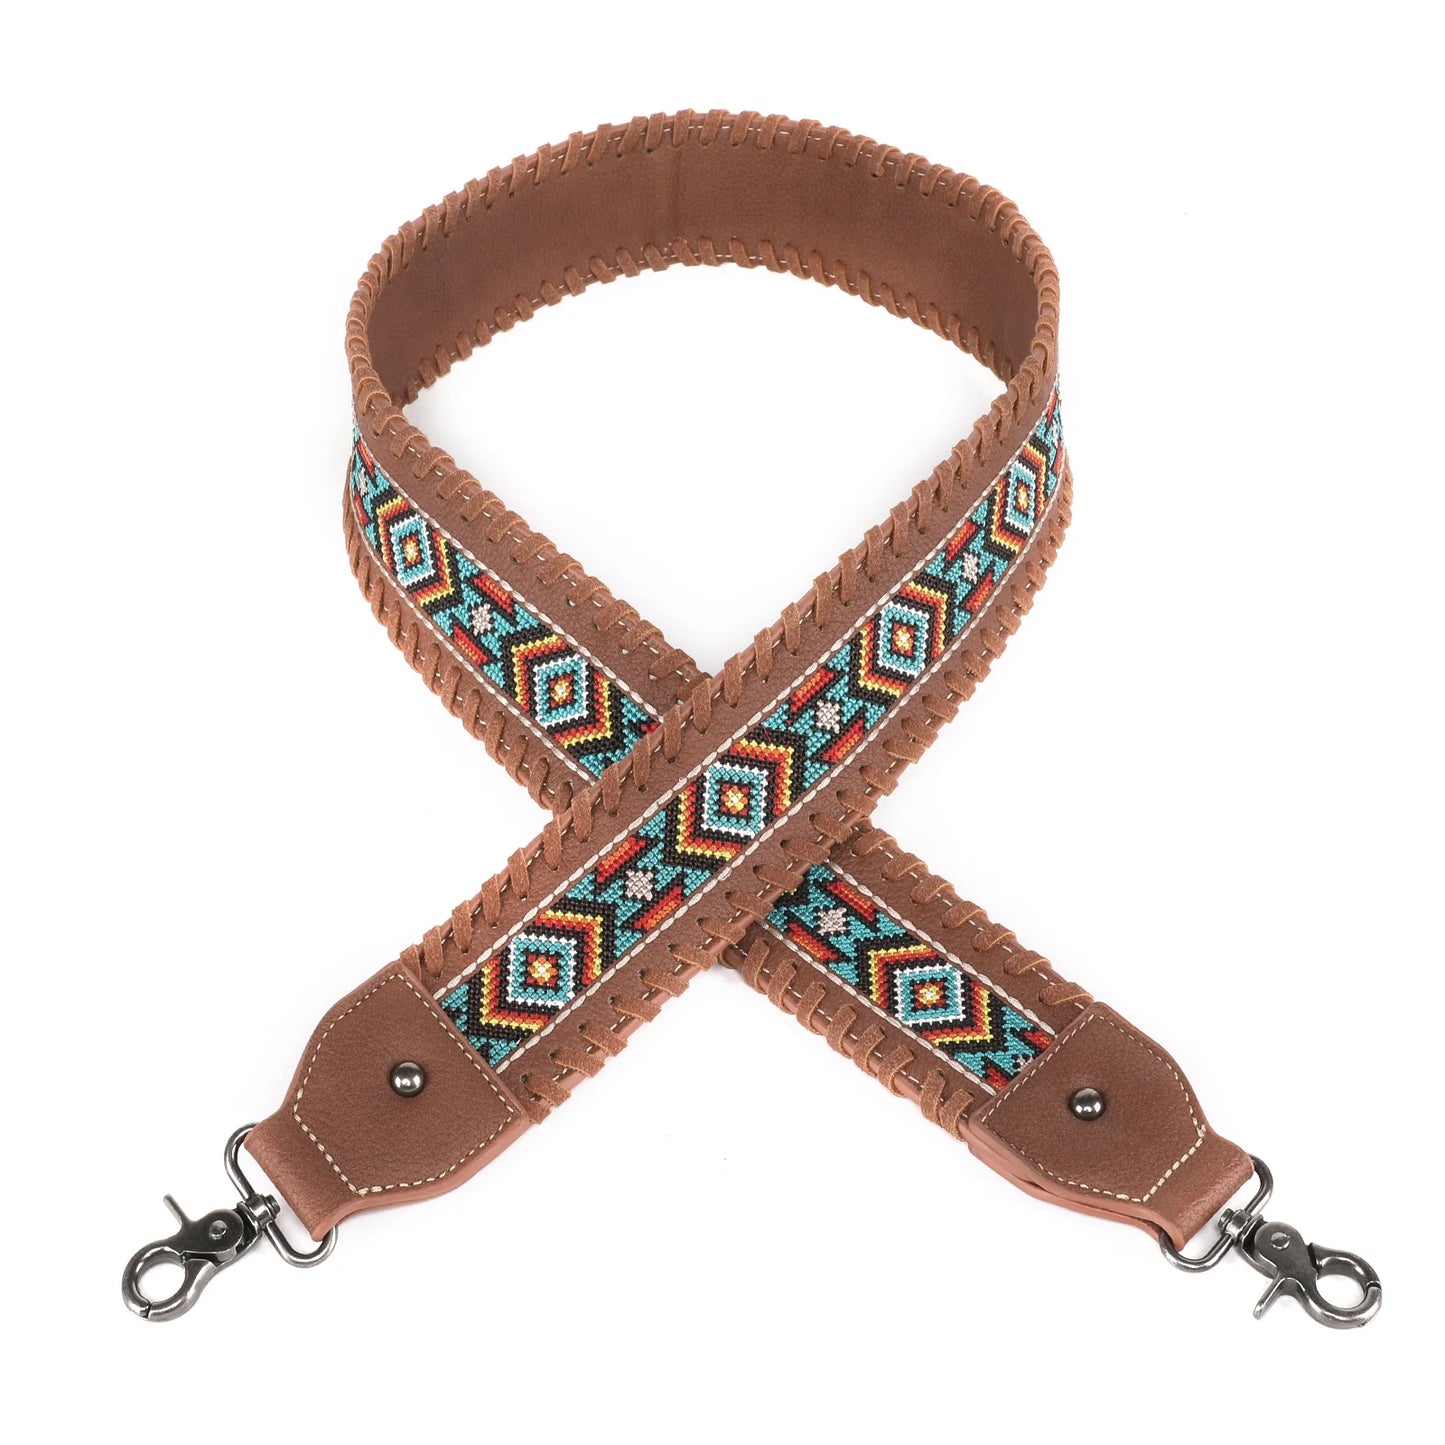 PST1013 - Montana West Western Guitar Style Embroidered Aztec Crossbody Strap